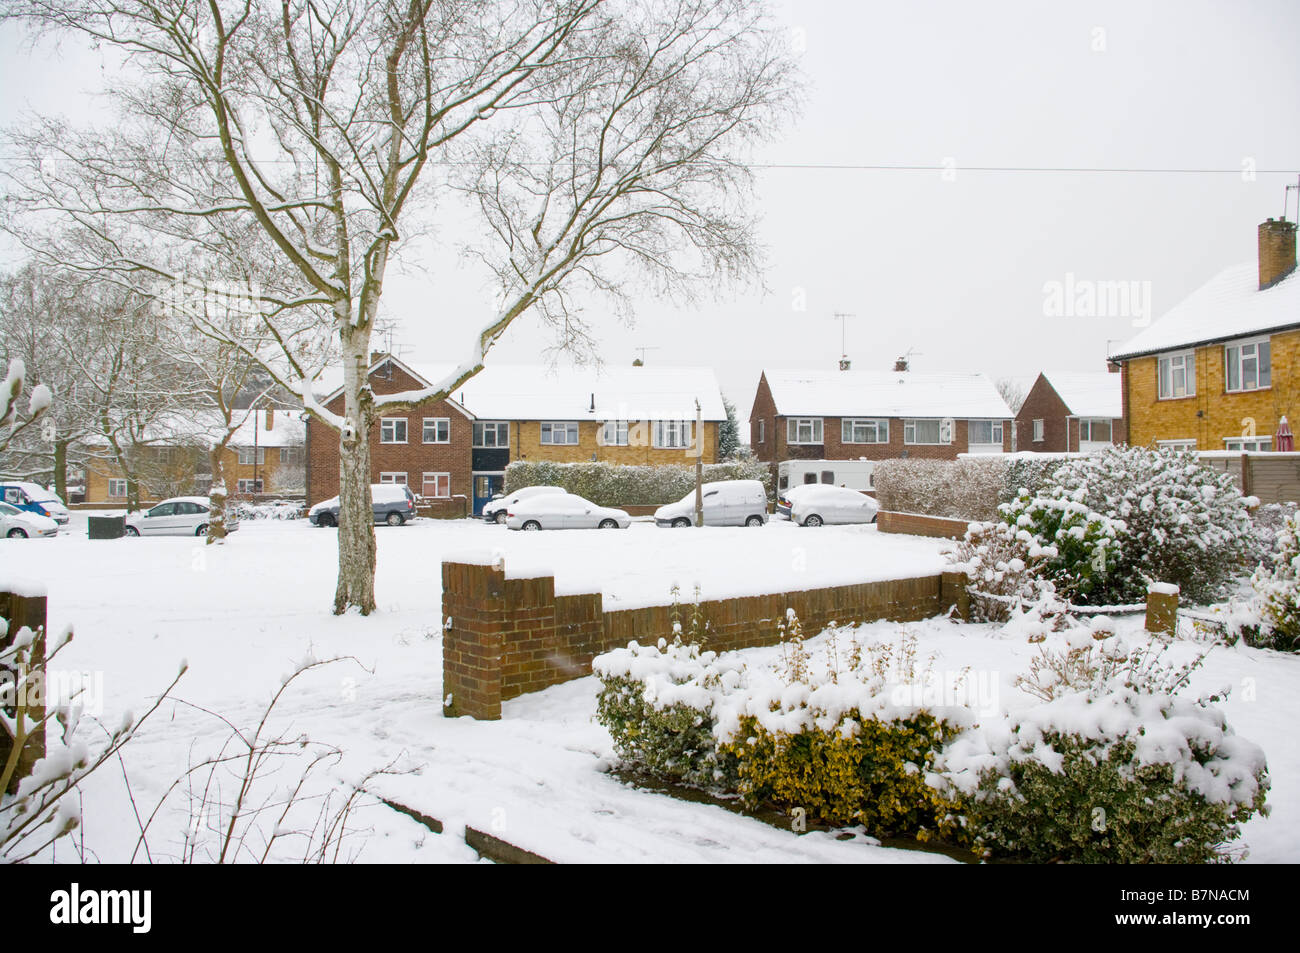 Residential Street Coneyberry in Reigate Surrey After a Heavy Snow Snowfall Winter suburban Street Scene Stock Photo